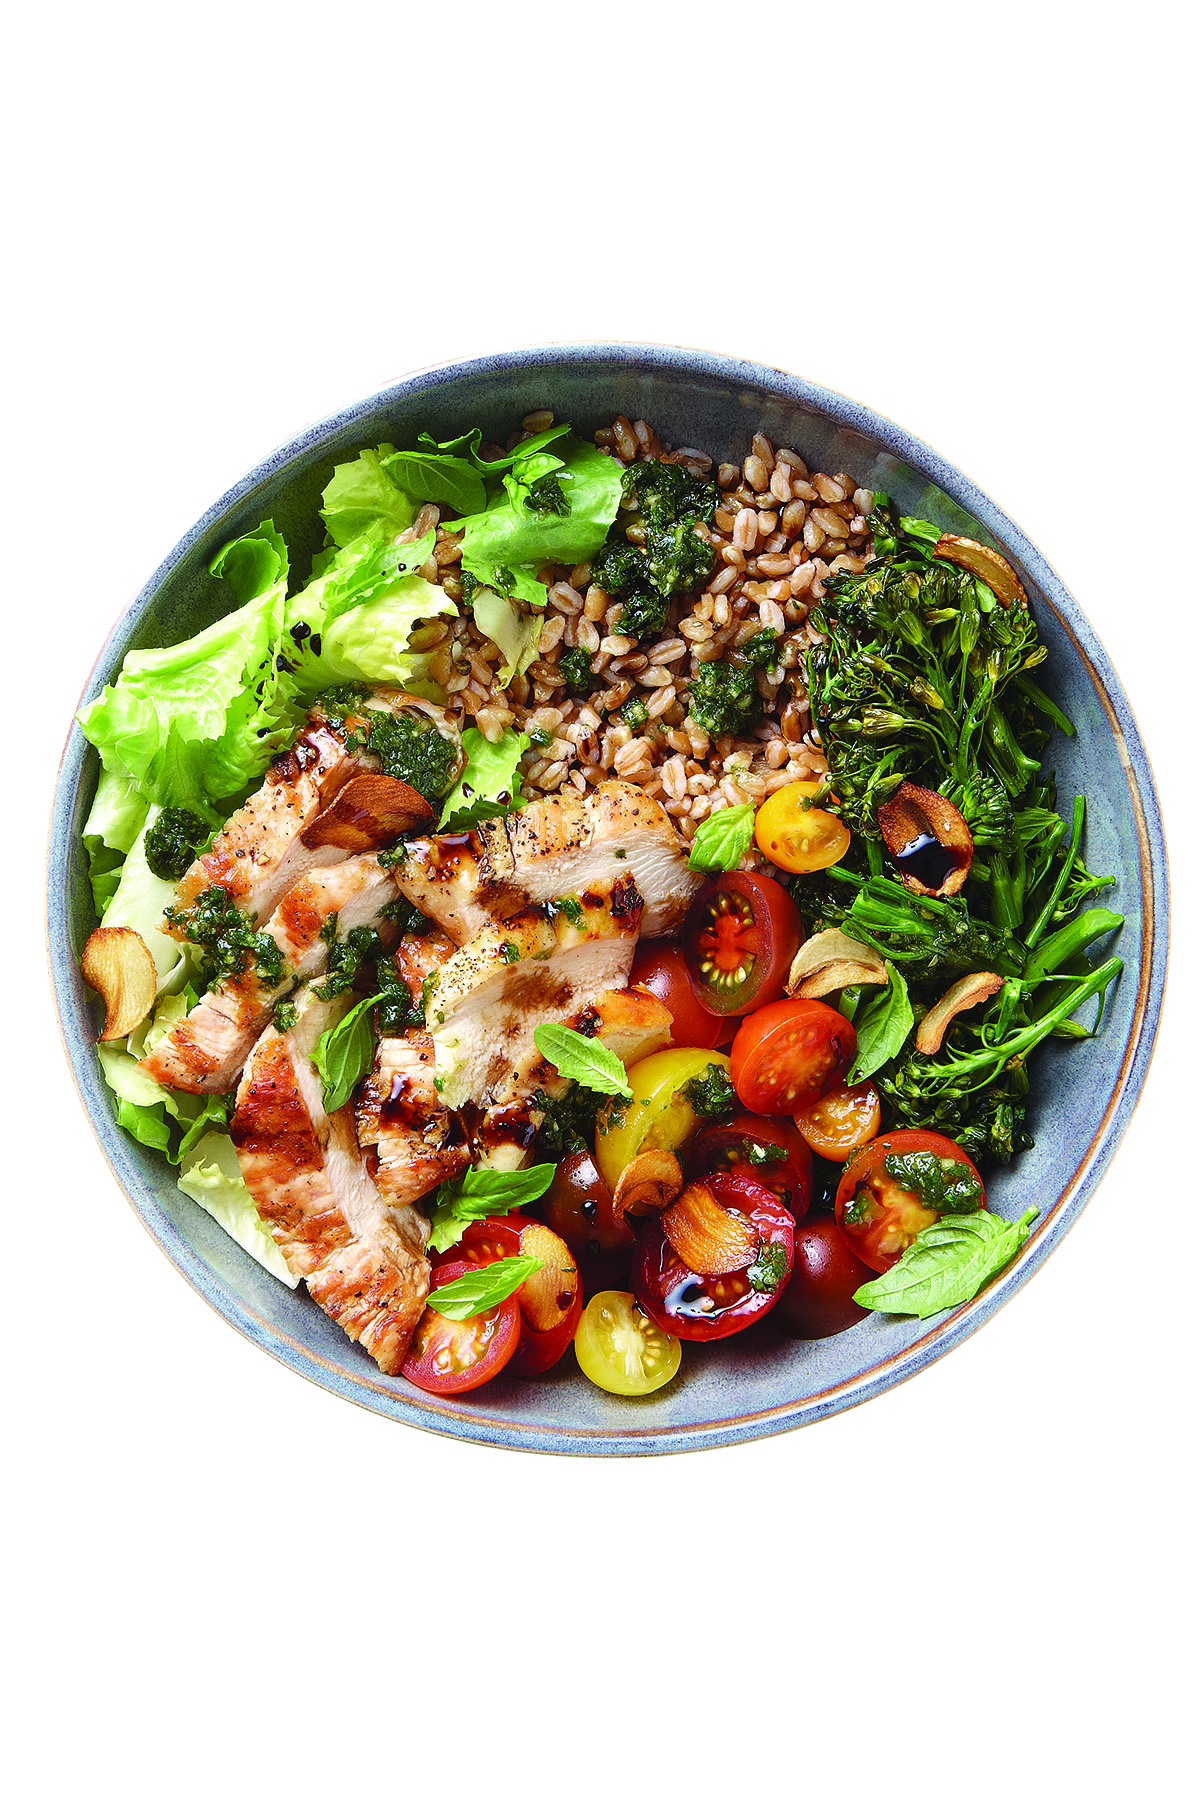 Tuscan Grain Bowl with Grilled Chicken and Broccolini